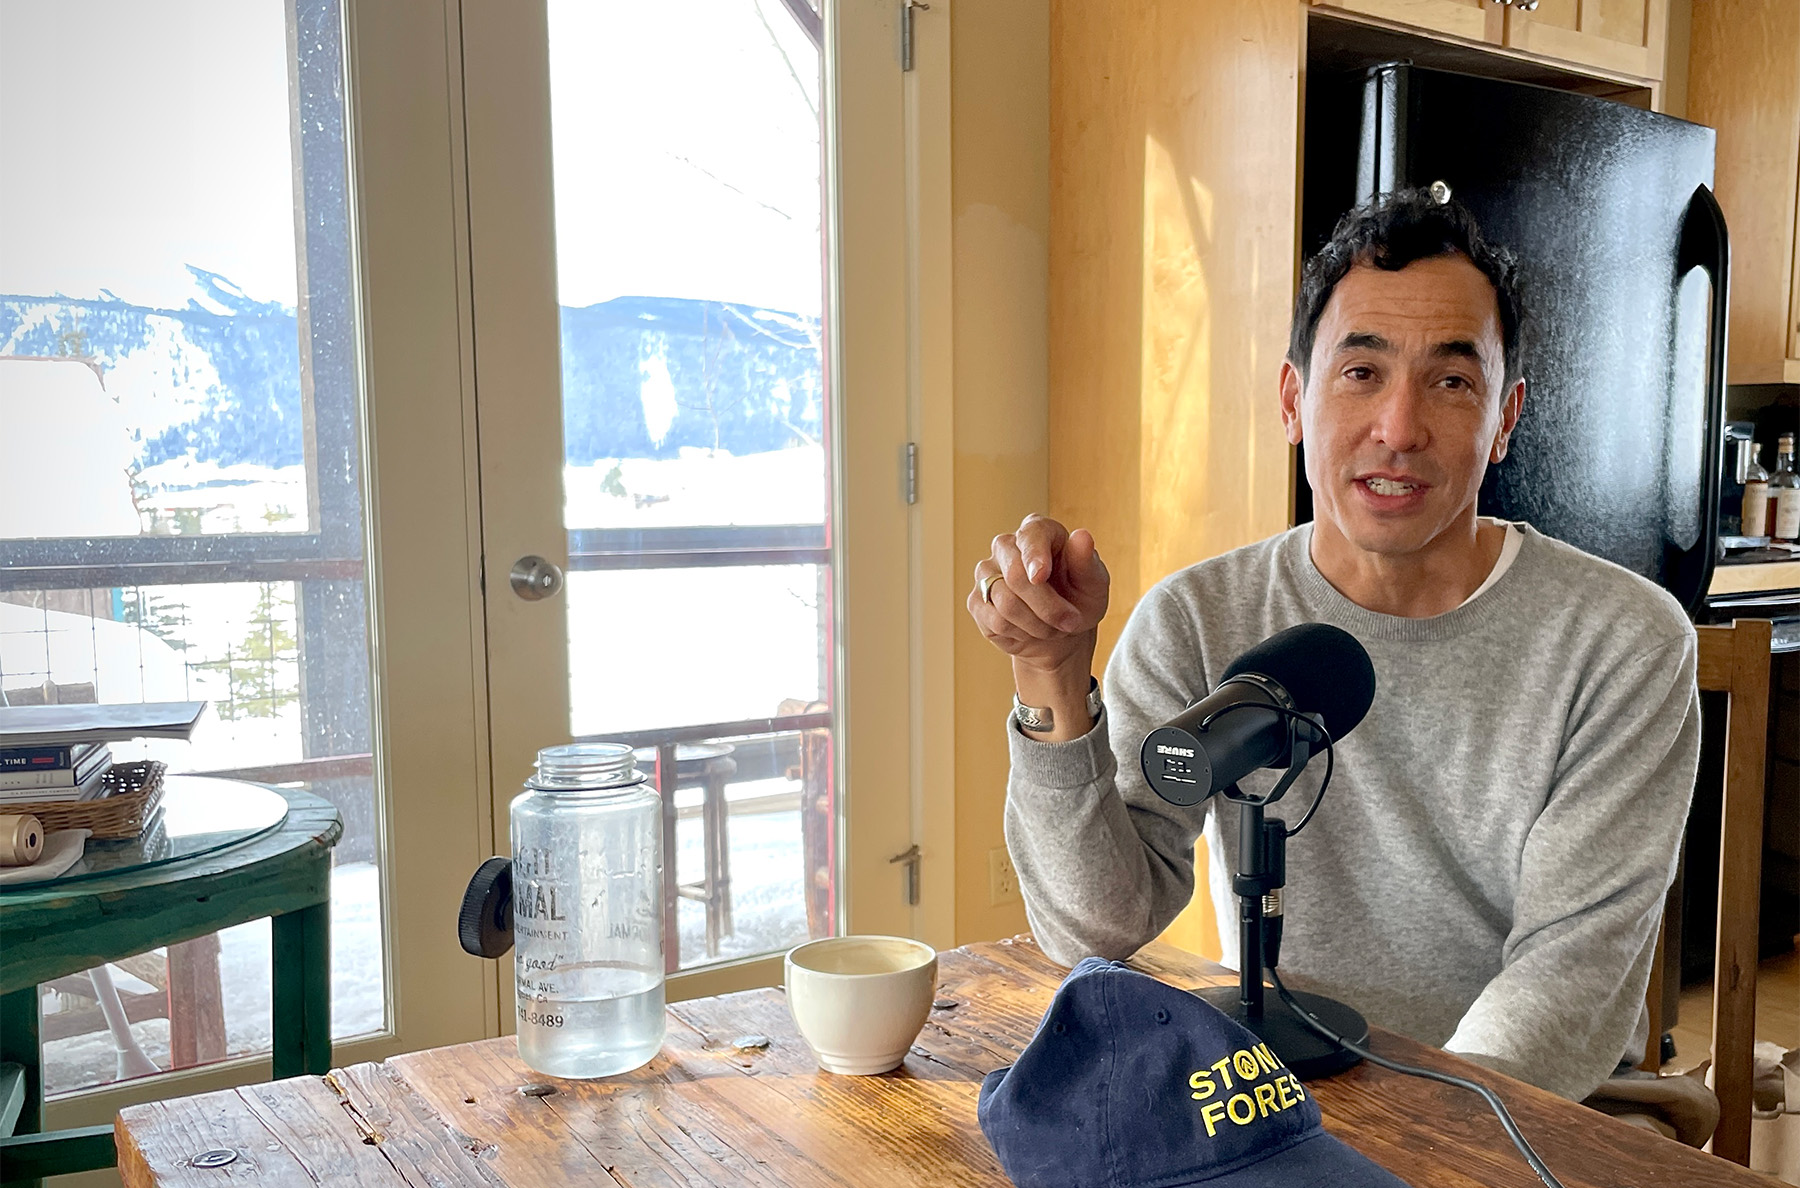 On our latest CRAFTED podcast, Jonathan talks with artist, designer, skier, & skater, Geoff McFetridge, about his current show in LA, Return to Stoner Forest; culture & commerce; his approach to collaborations; the new film about Geoff that’s premiering at South By Southwest, ‘Geoff McFetridge: Drawing a Life,’ and more.